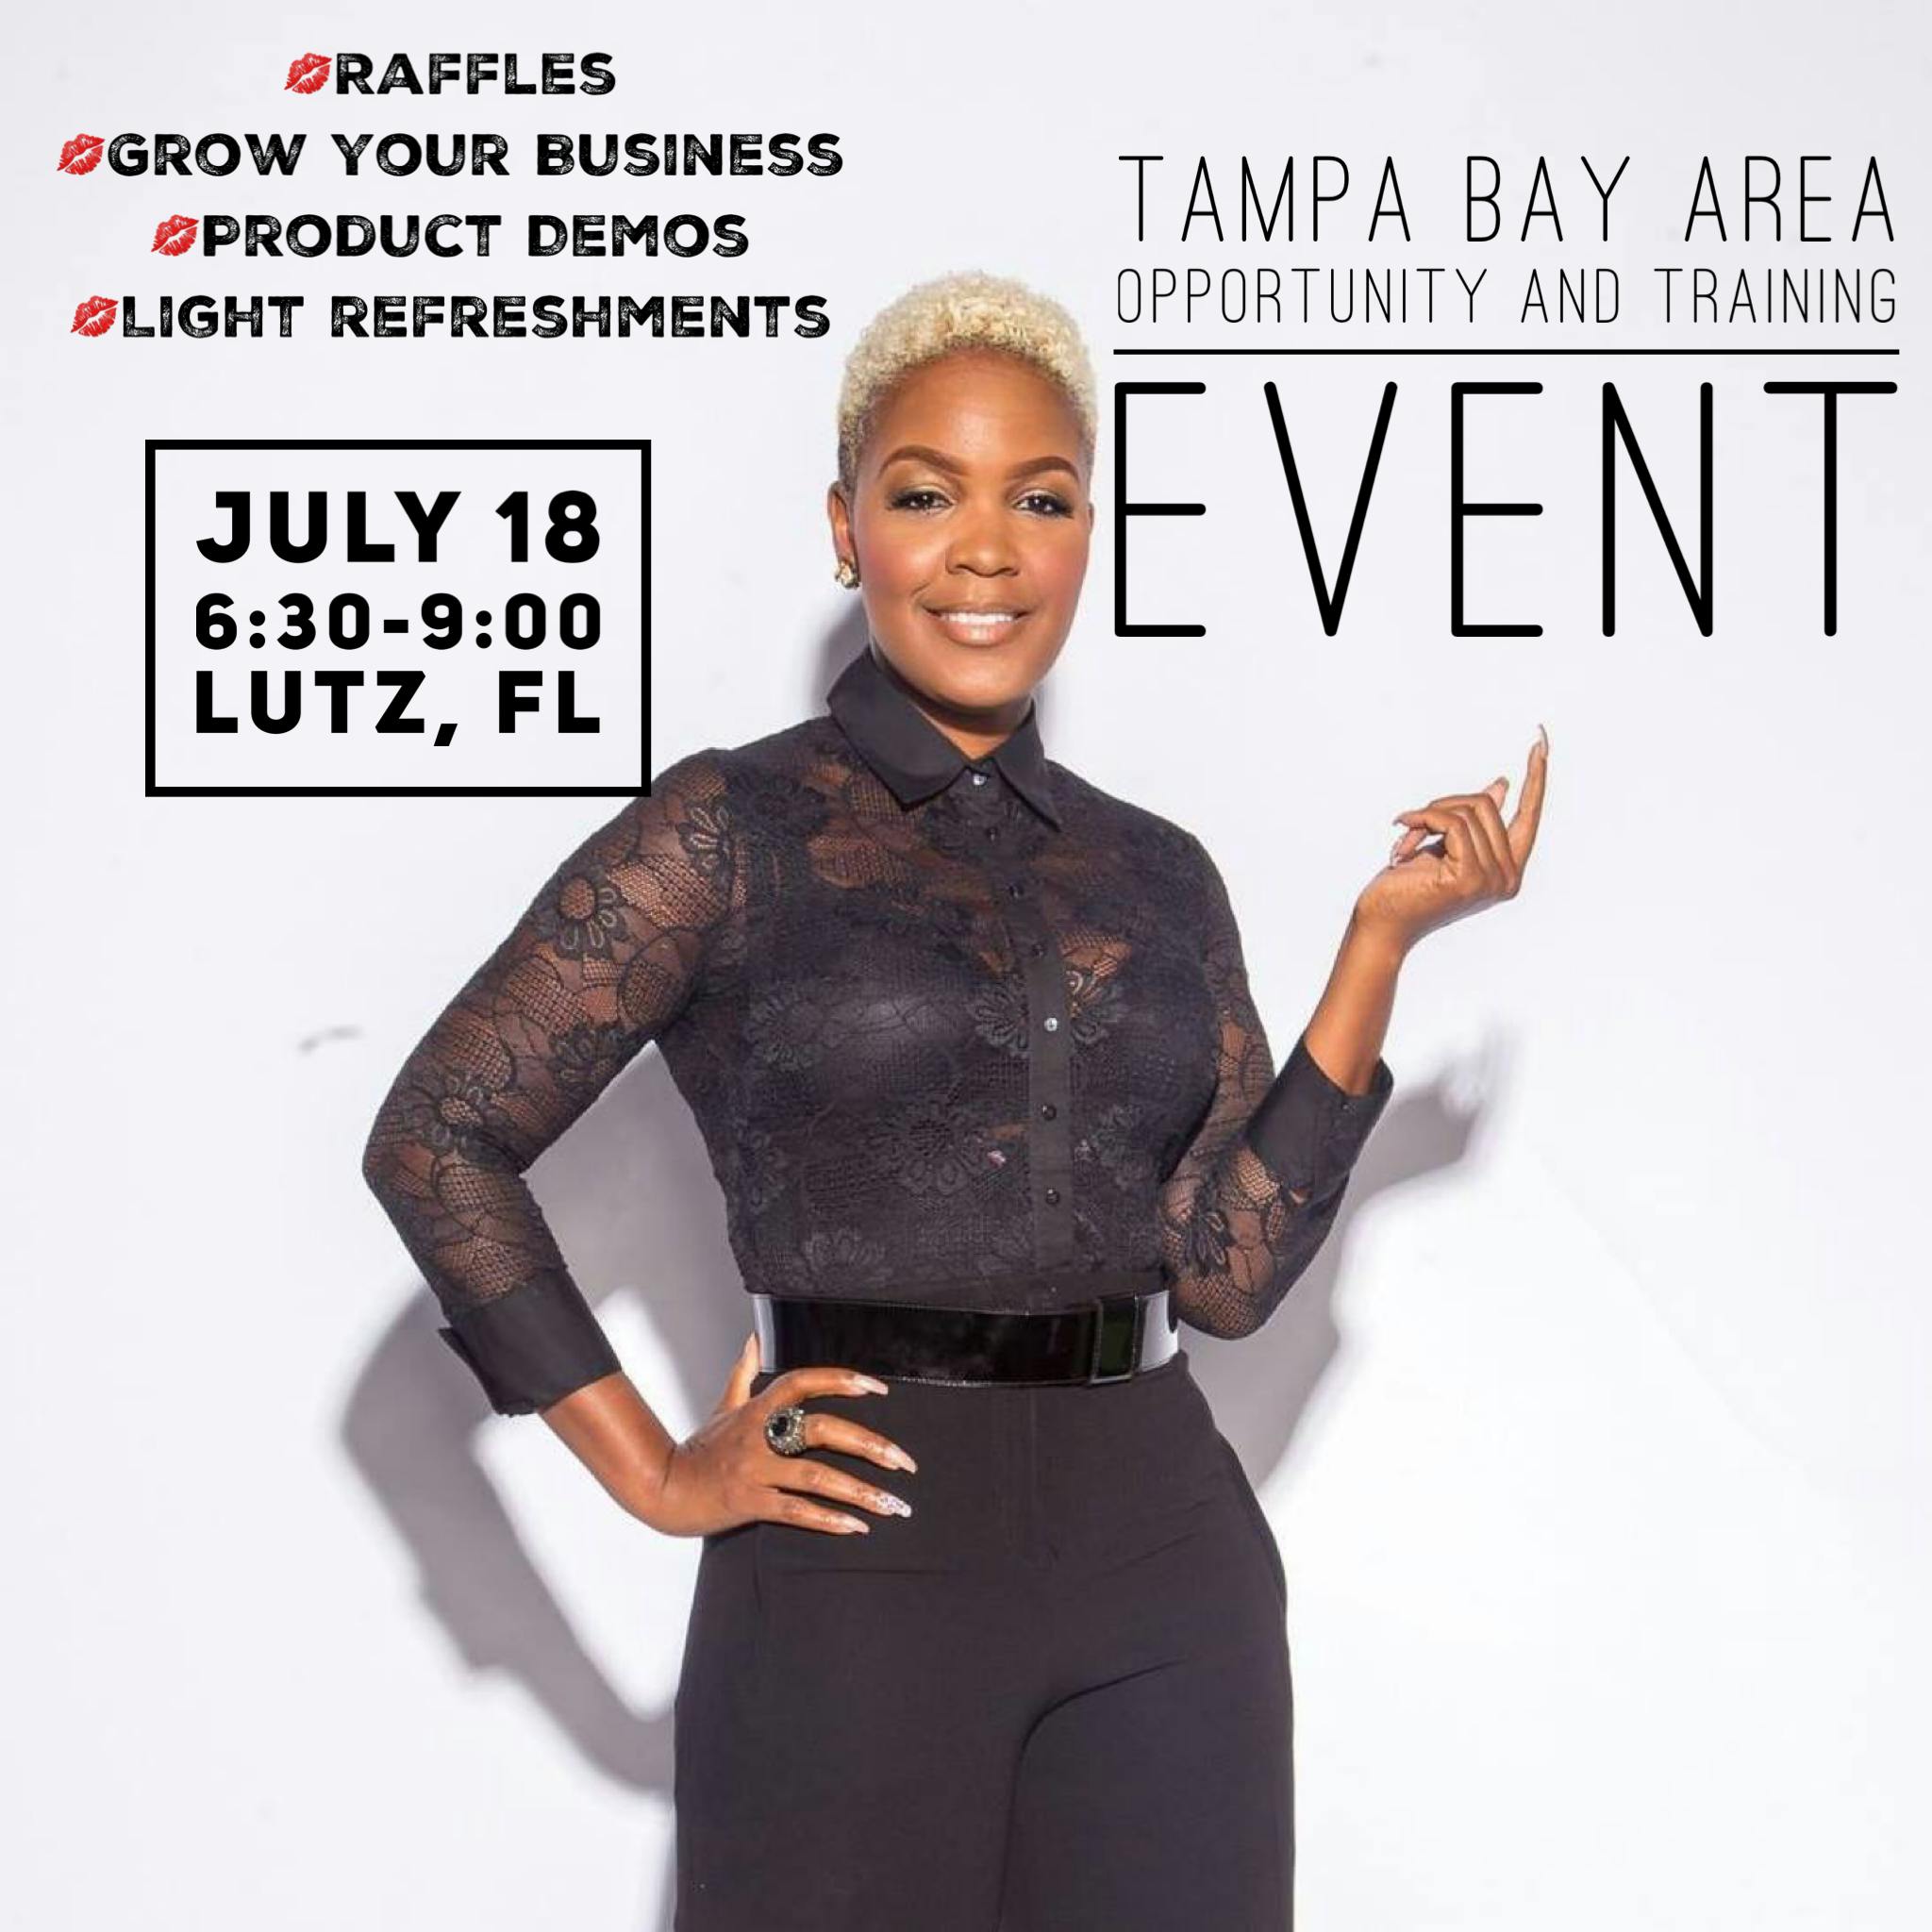 Tampa Bay area Training and Opportunity Event with Coach Chi